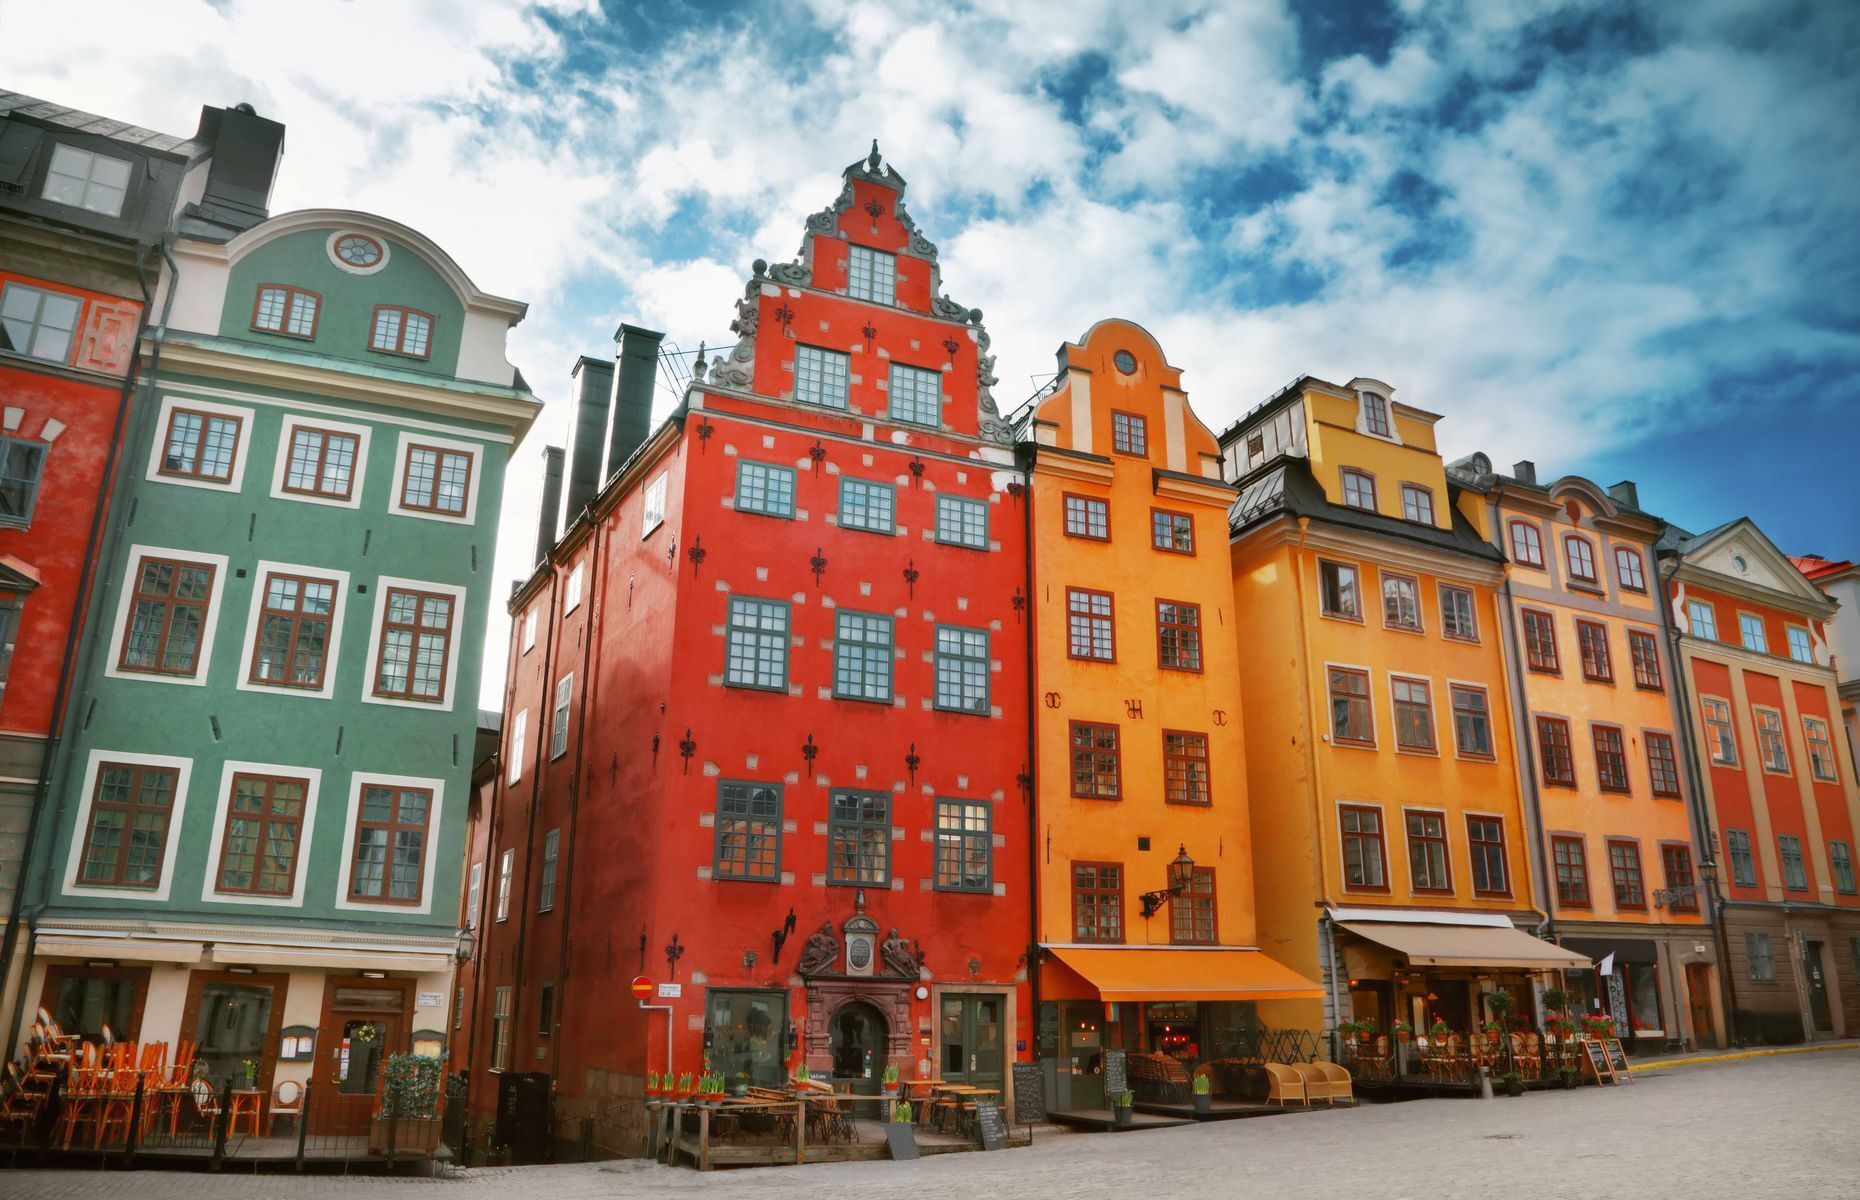 <p>Also known as <a href="https://visitsweden.com/where-to-go/middle-sweden/stockholm/stockholm-old-town/" rel="noreferrer noopener">Gamla Stan</a>, Stockholm’s Old Town dates to the 13th century and has retained both its medieval distinction and Scandinavian look. Explore cobblestone streets, artisan studios, the <a href="https://nobelprizemuseum.se/en/" rel="noreferrer noopener">Nobel Prize Museum</a>, charming stores, and good restaurants. Don’t miss this must-see historical district during your next stay in Sweden.</p>